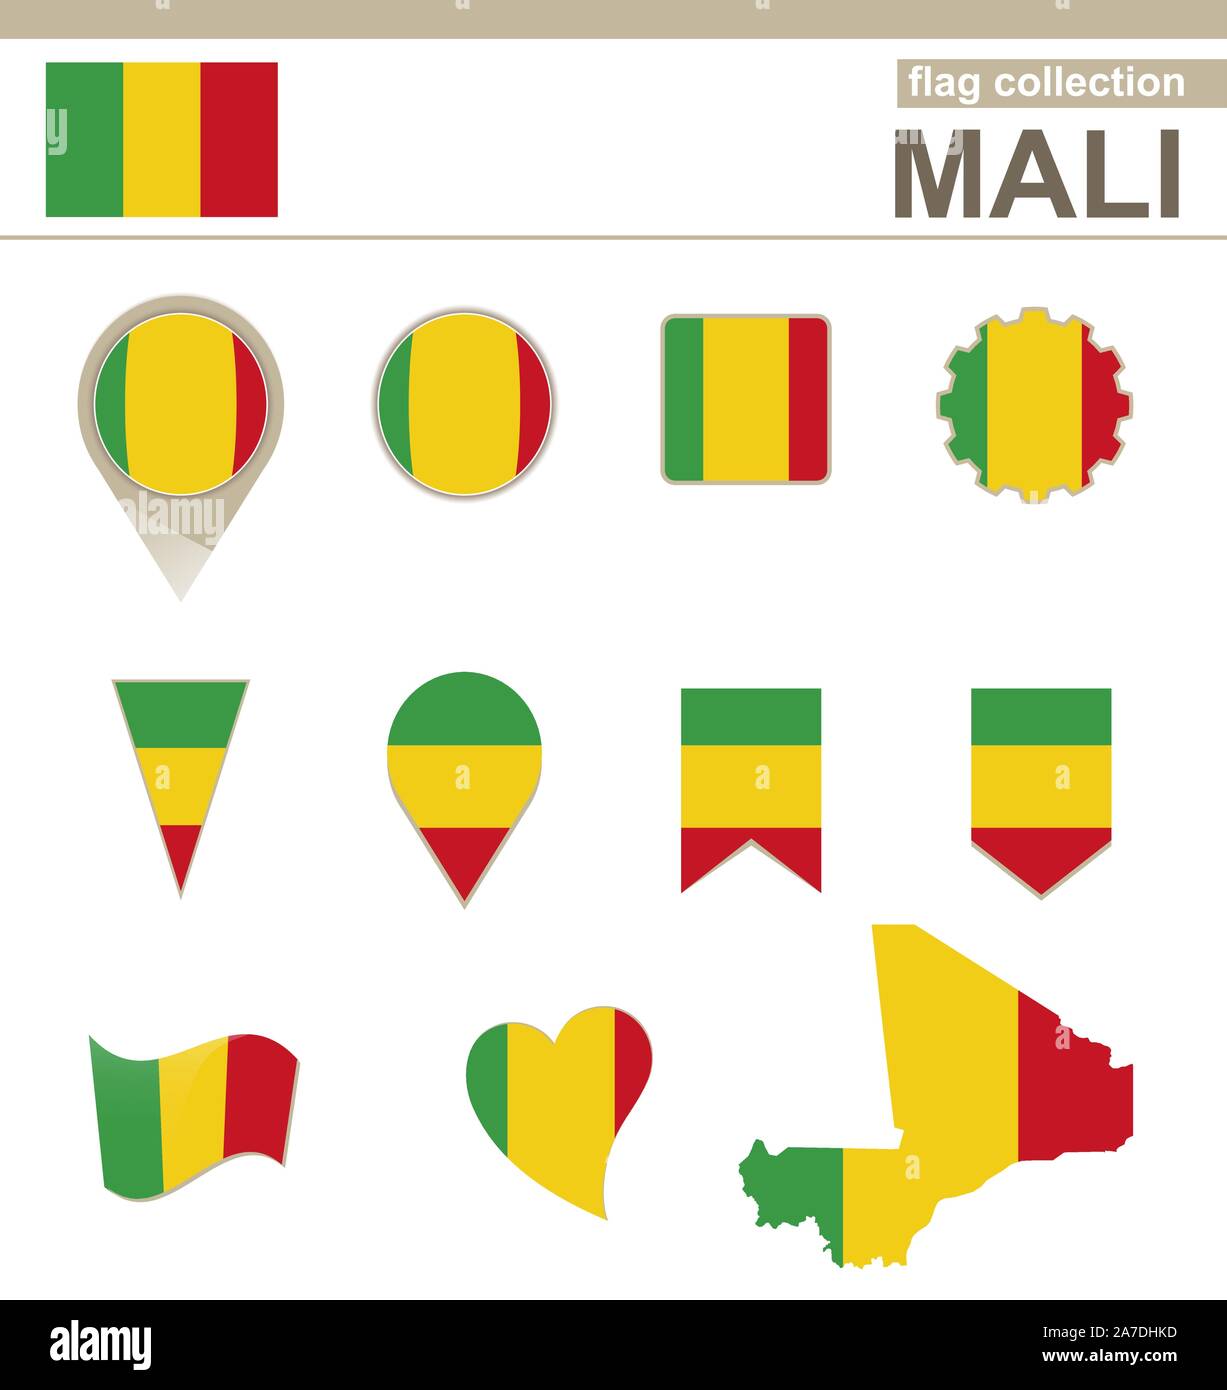 Mali Flag Collection, 12 versions Stock Vector